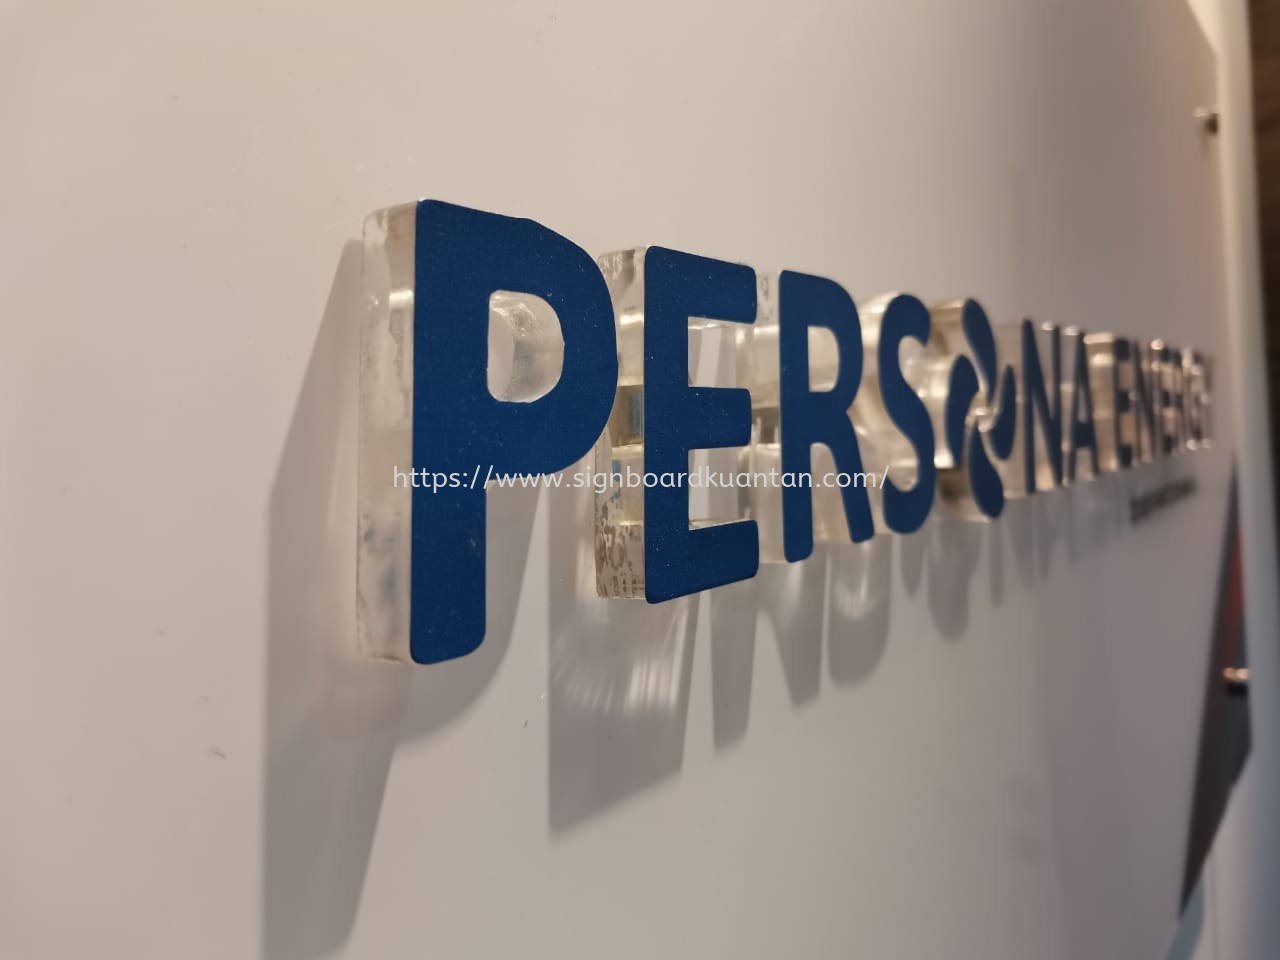 PERSONA ENERGY INDOOR 3D LETTERING ACRYLIC & ACRYLIC POSTER FRAME AT KUANTAN